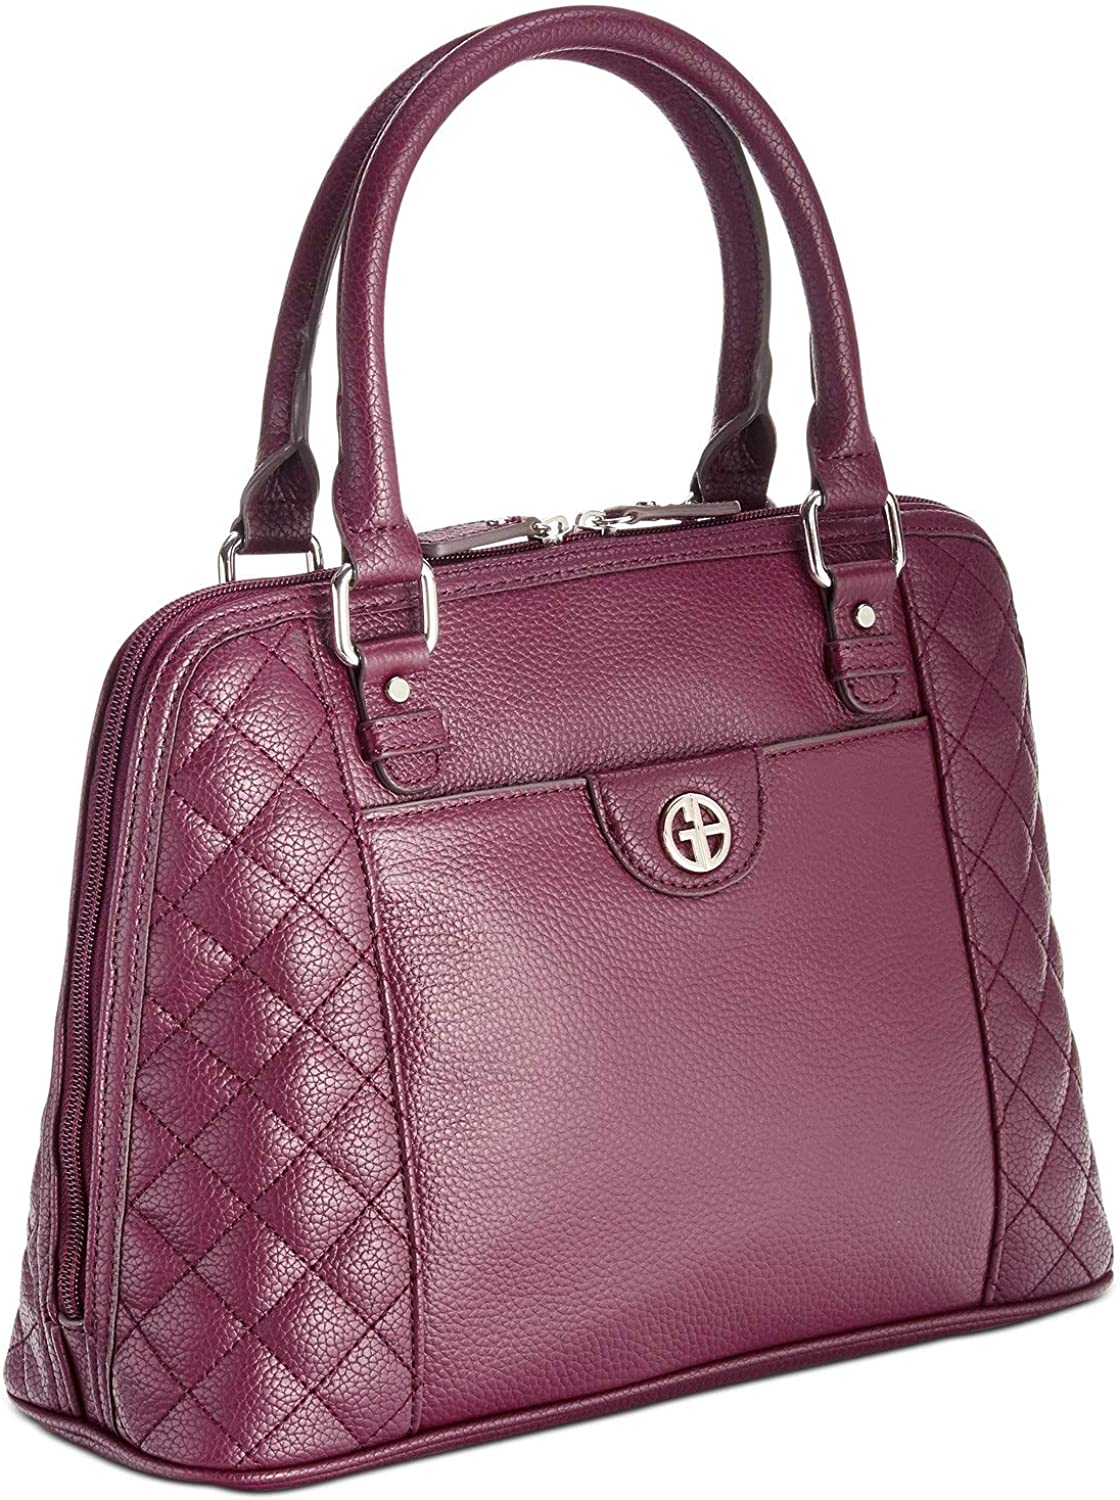 Giani Bernini Womens Quilted Dome Satchel